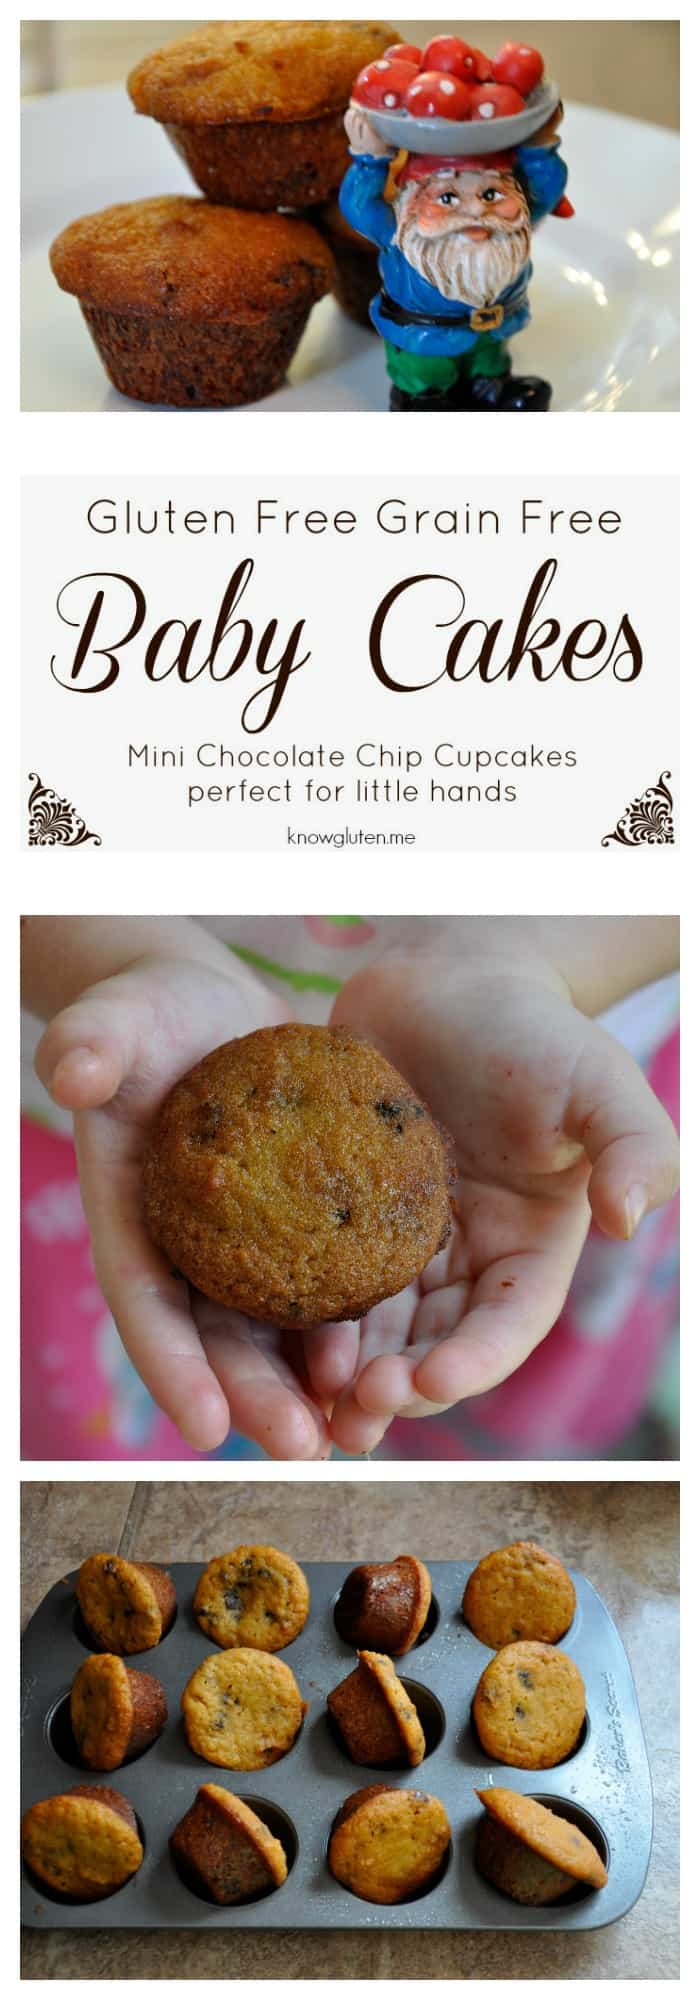 Gluten Free, Grain Free Baby Cakes - mini chocolate chip cupcakes made with coconut flour, perfect for snack time